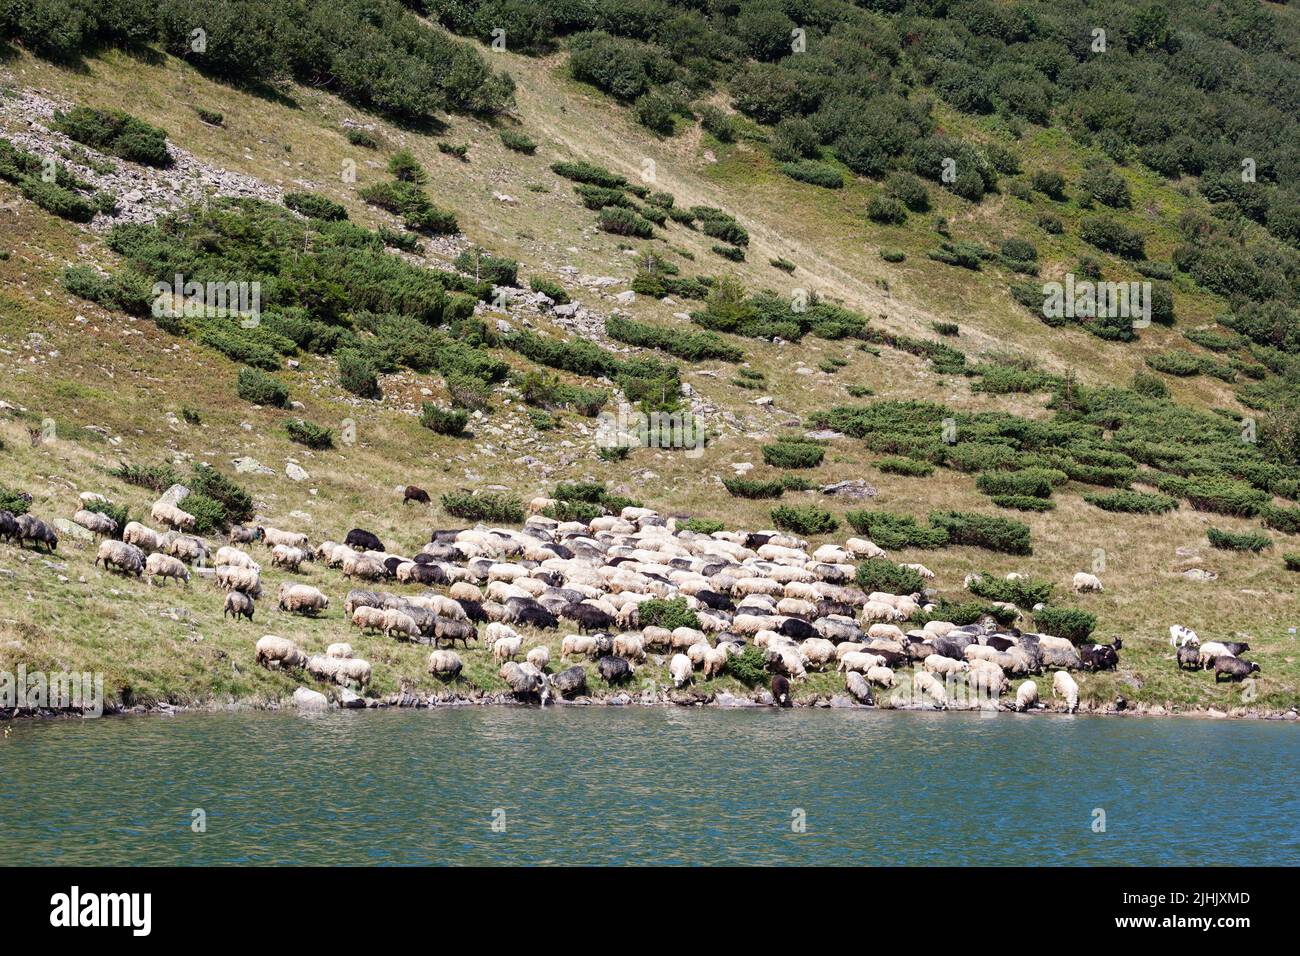 A flock of sheep in the Carpathian mountains. Ukraine. Stock Photo